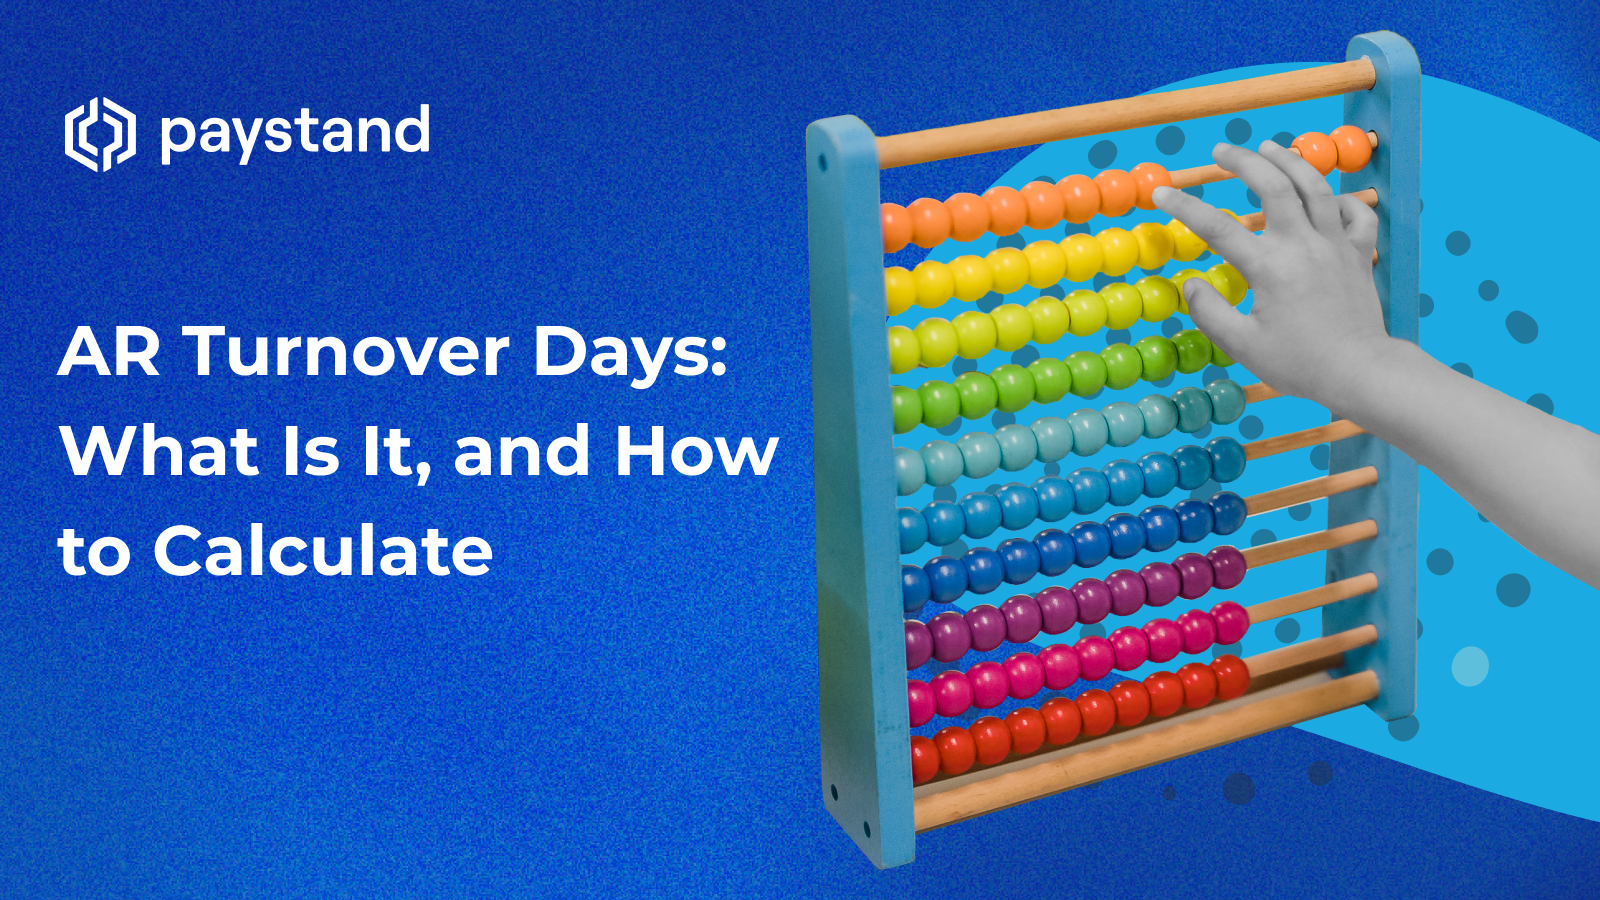 AR Turnover Days: What Is It, and How to Calculate